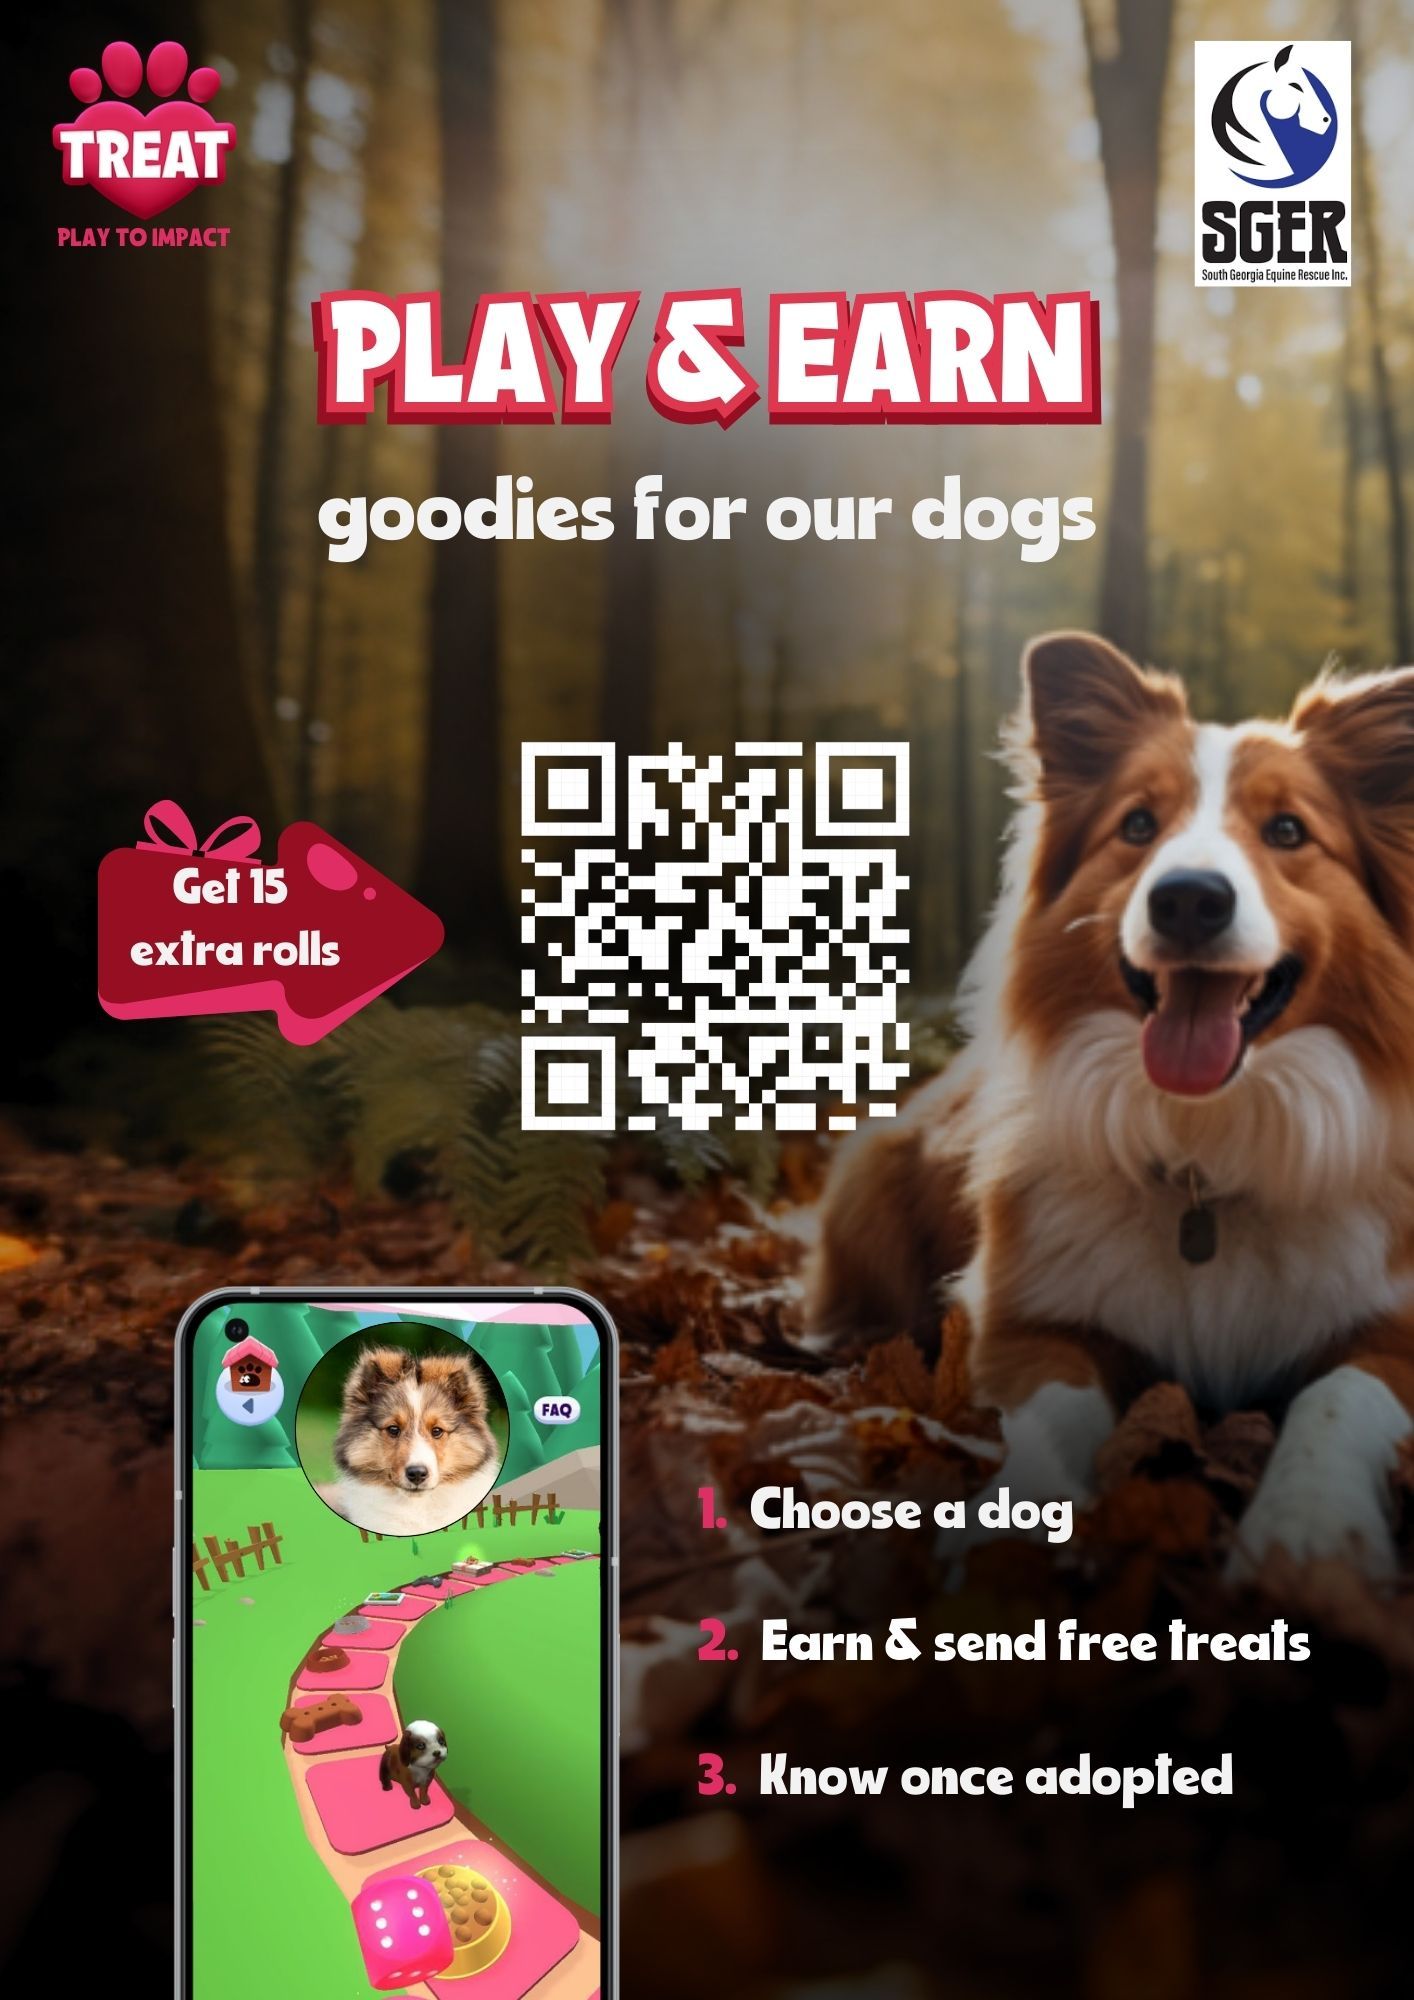 A poster for a play and earn game for dogs.